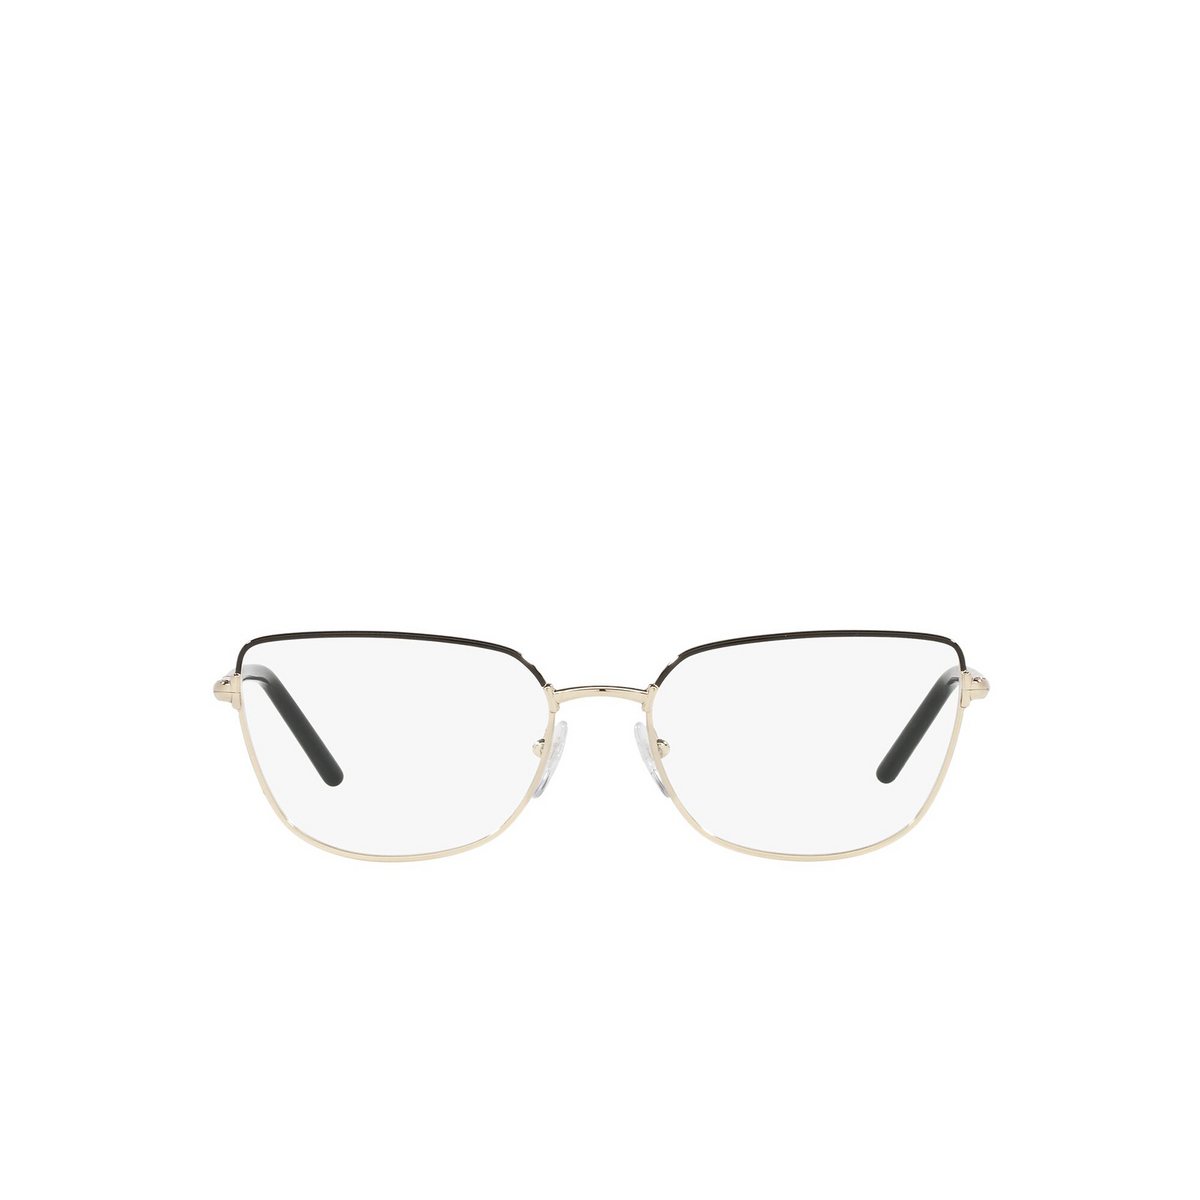 Prada® Butterfly Eyeglasses: PR 59YV color Black / Pale Gold AAV1O1 - front view.